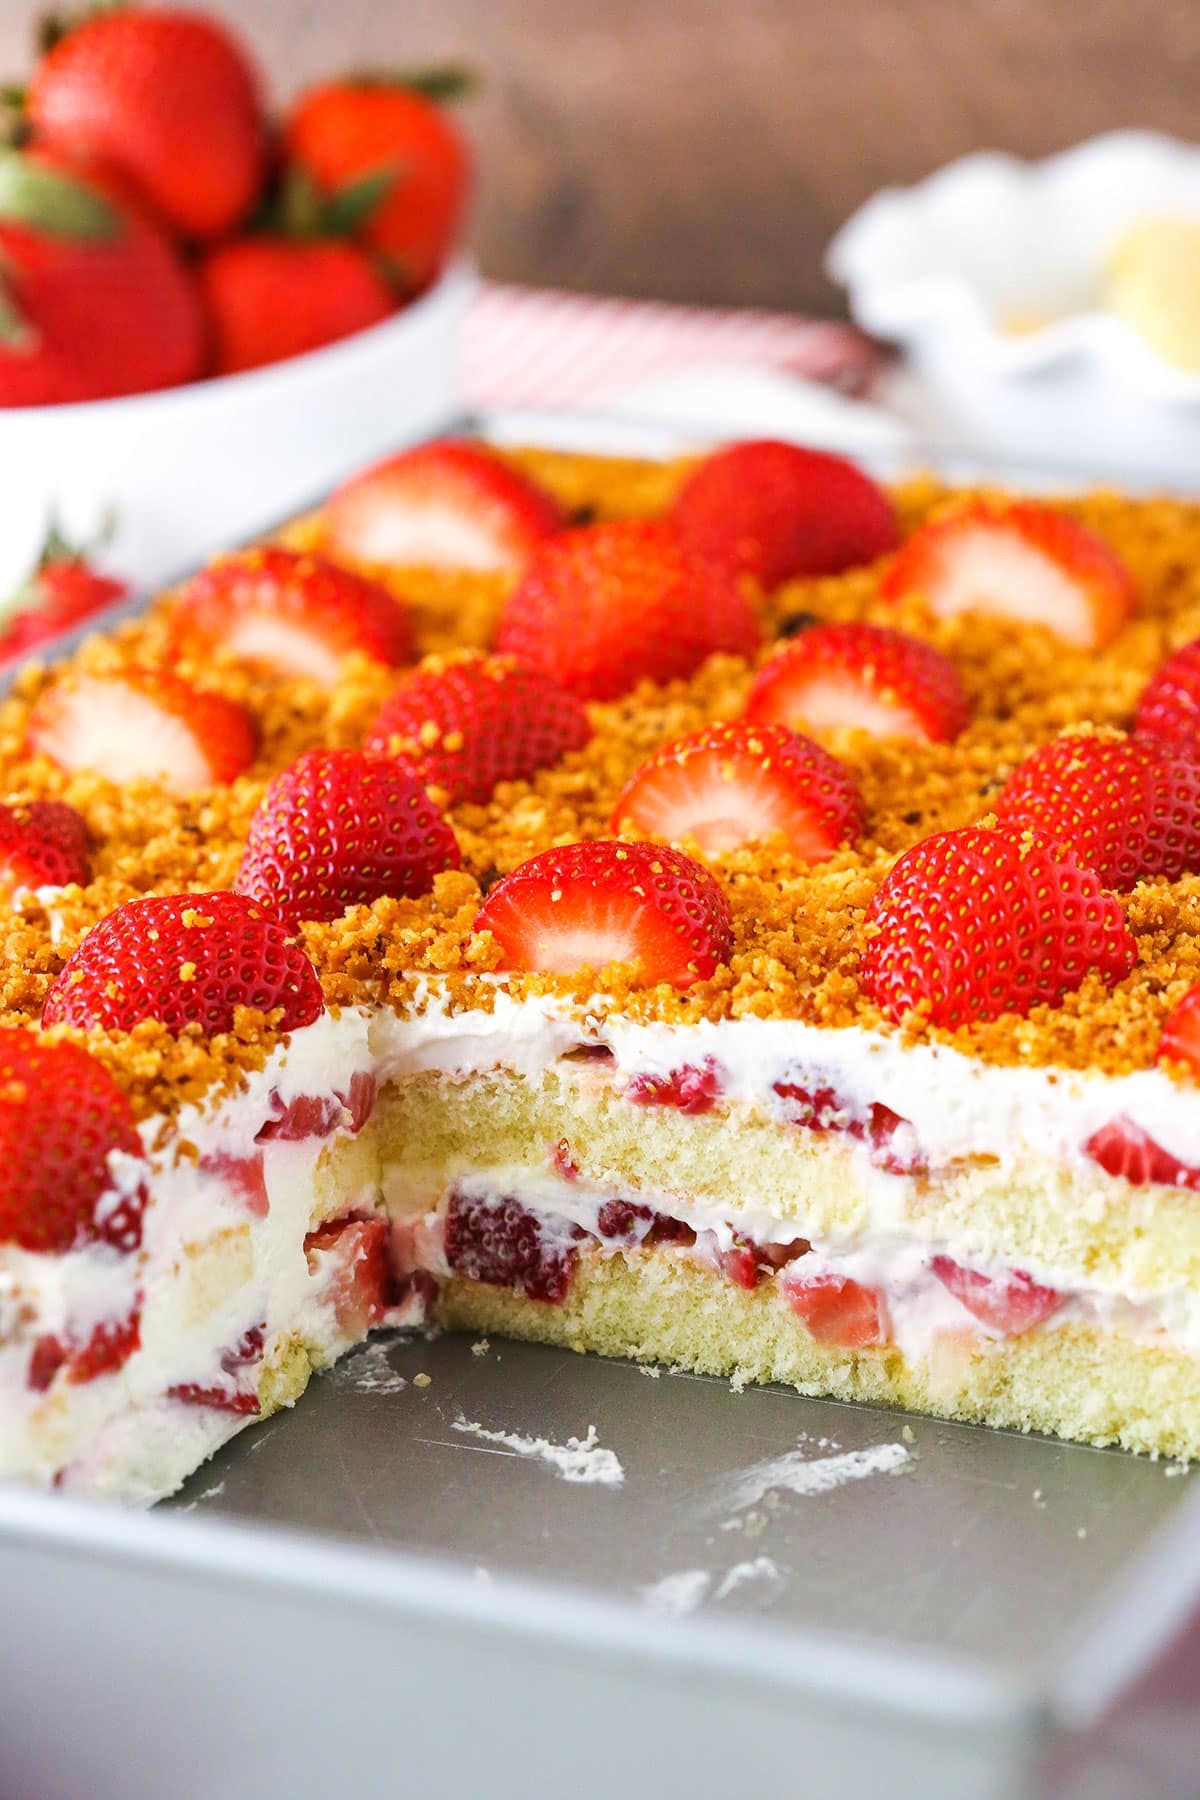 Strawberry Shortcake Icebox Cake with a serving removed showing the internal layers